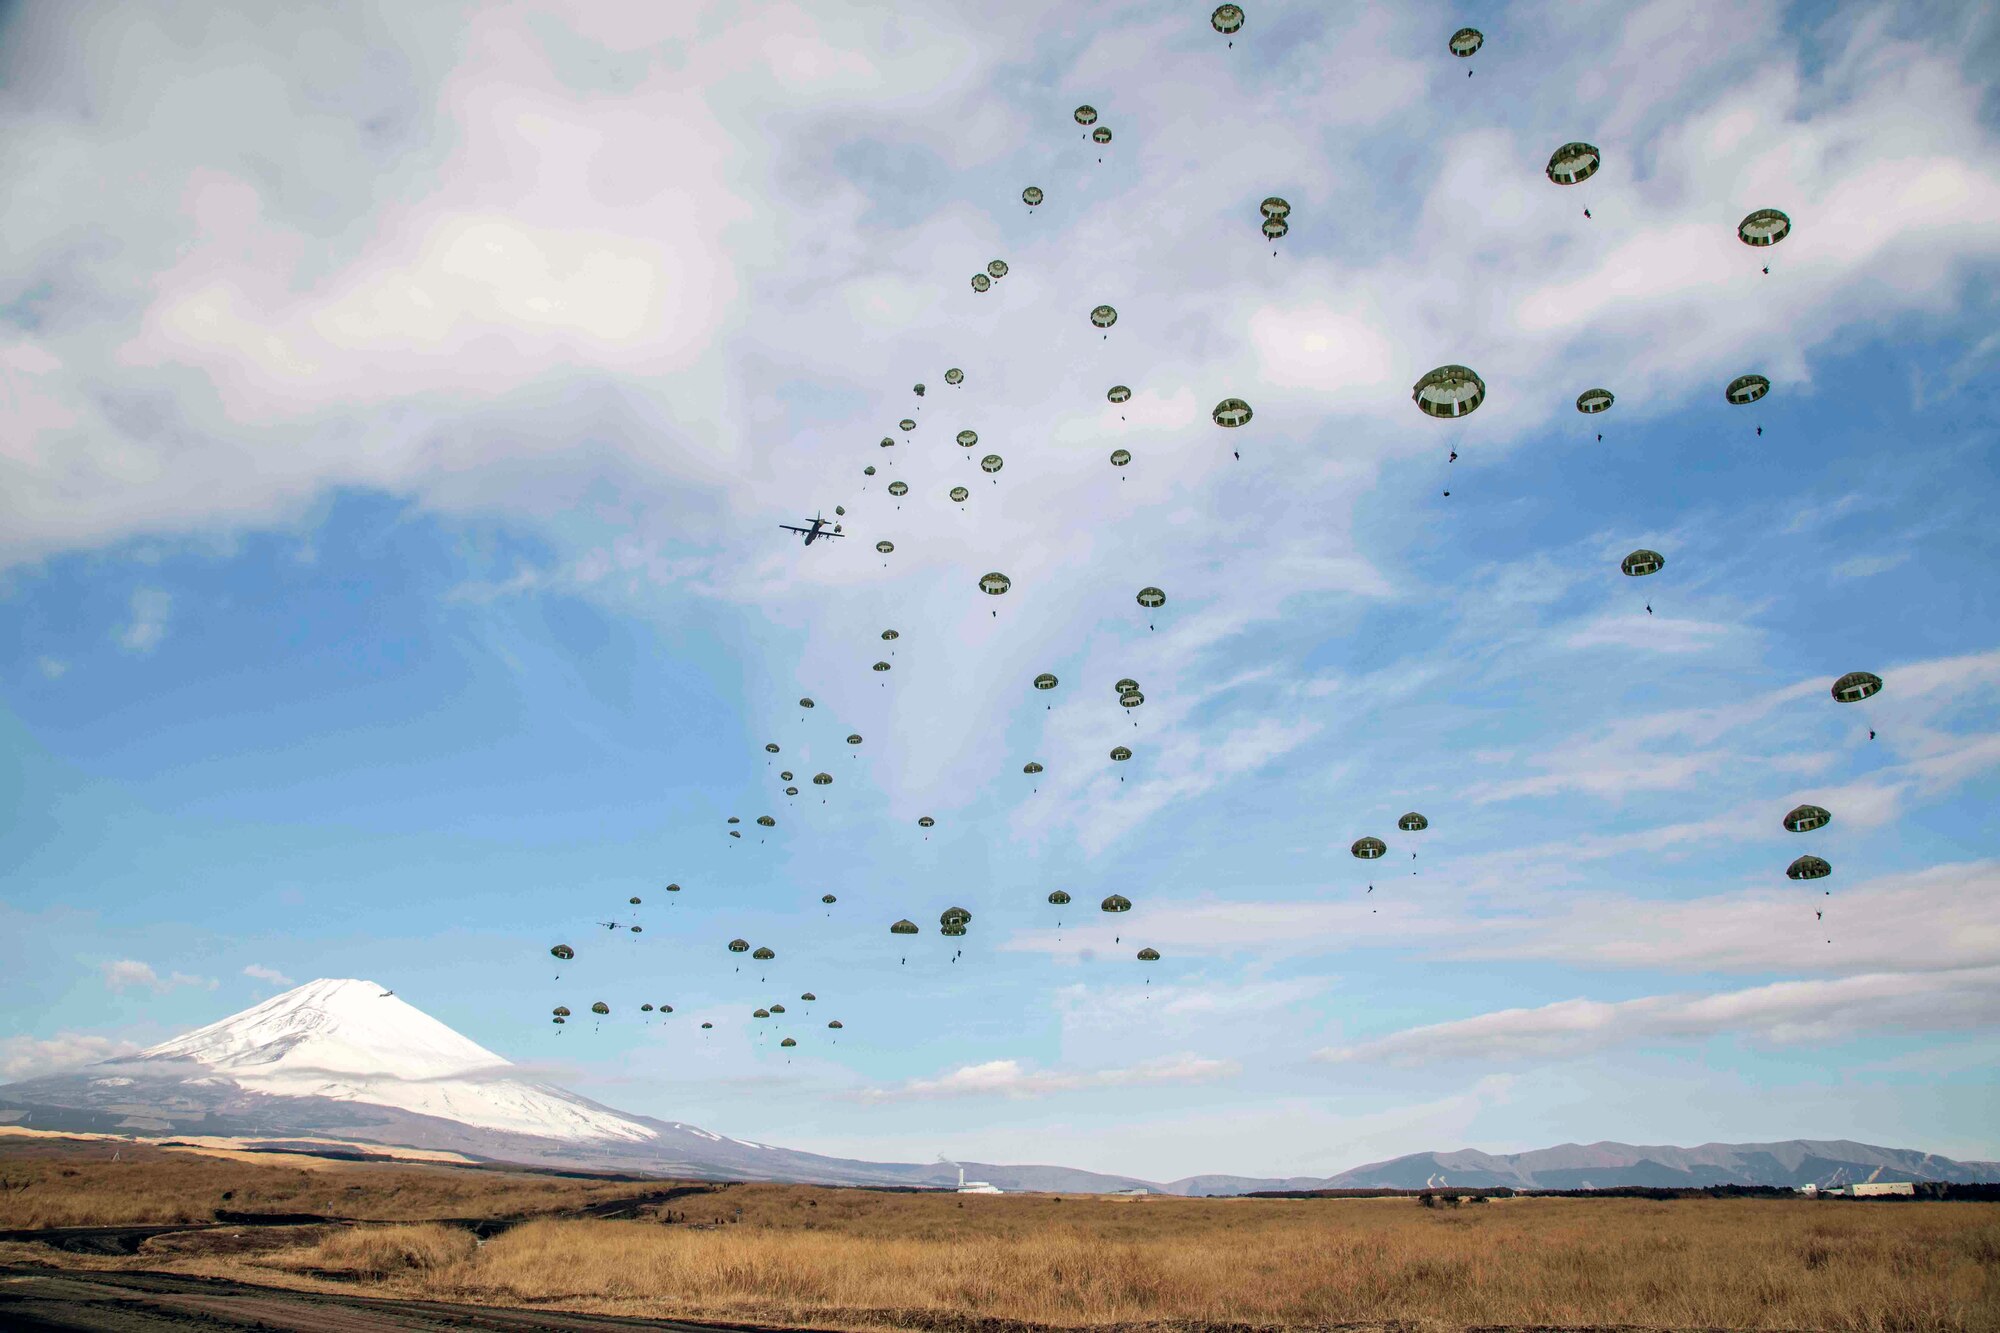 Japan Ground Self-Defense Force paratroopers assigned to the 1st Airborne Brigade descend from a U.S. Air Force C-130J